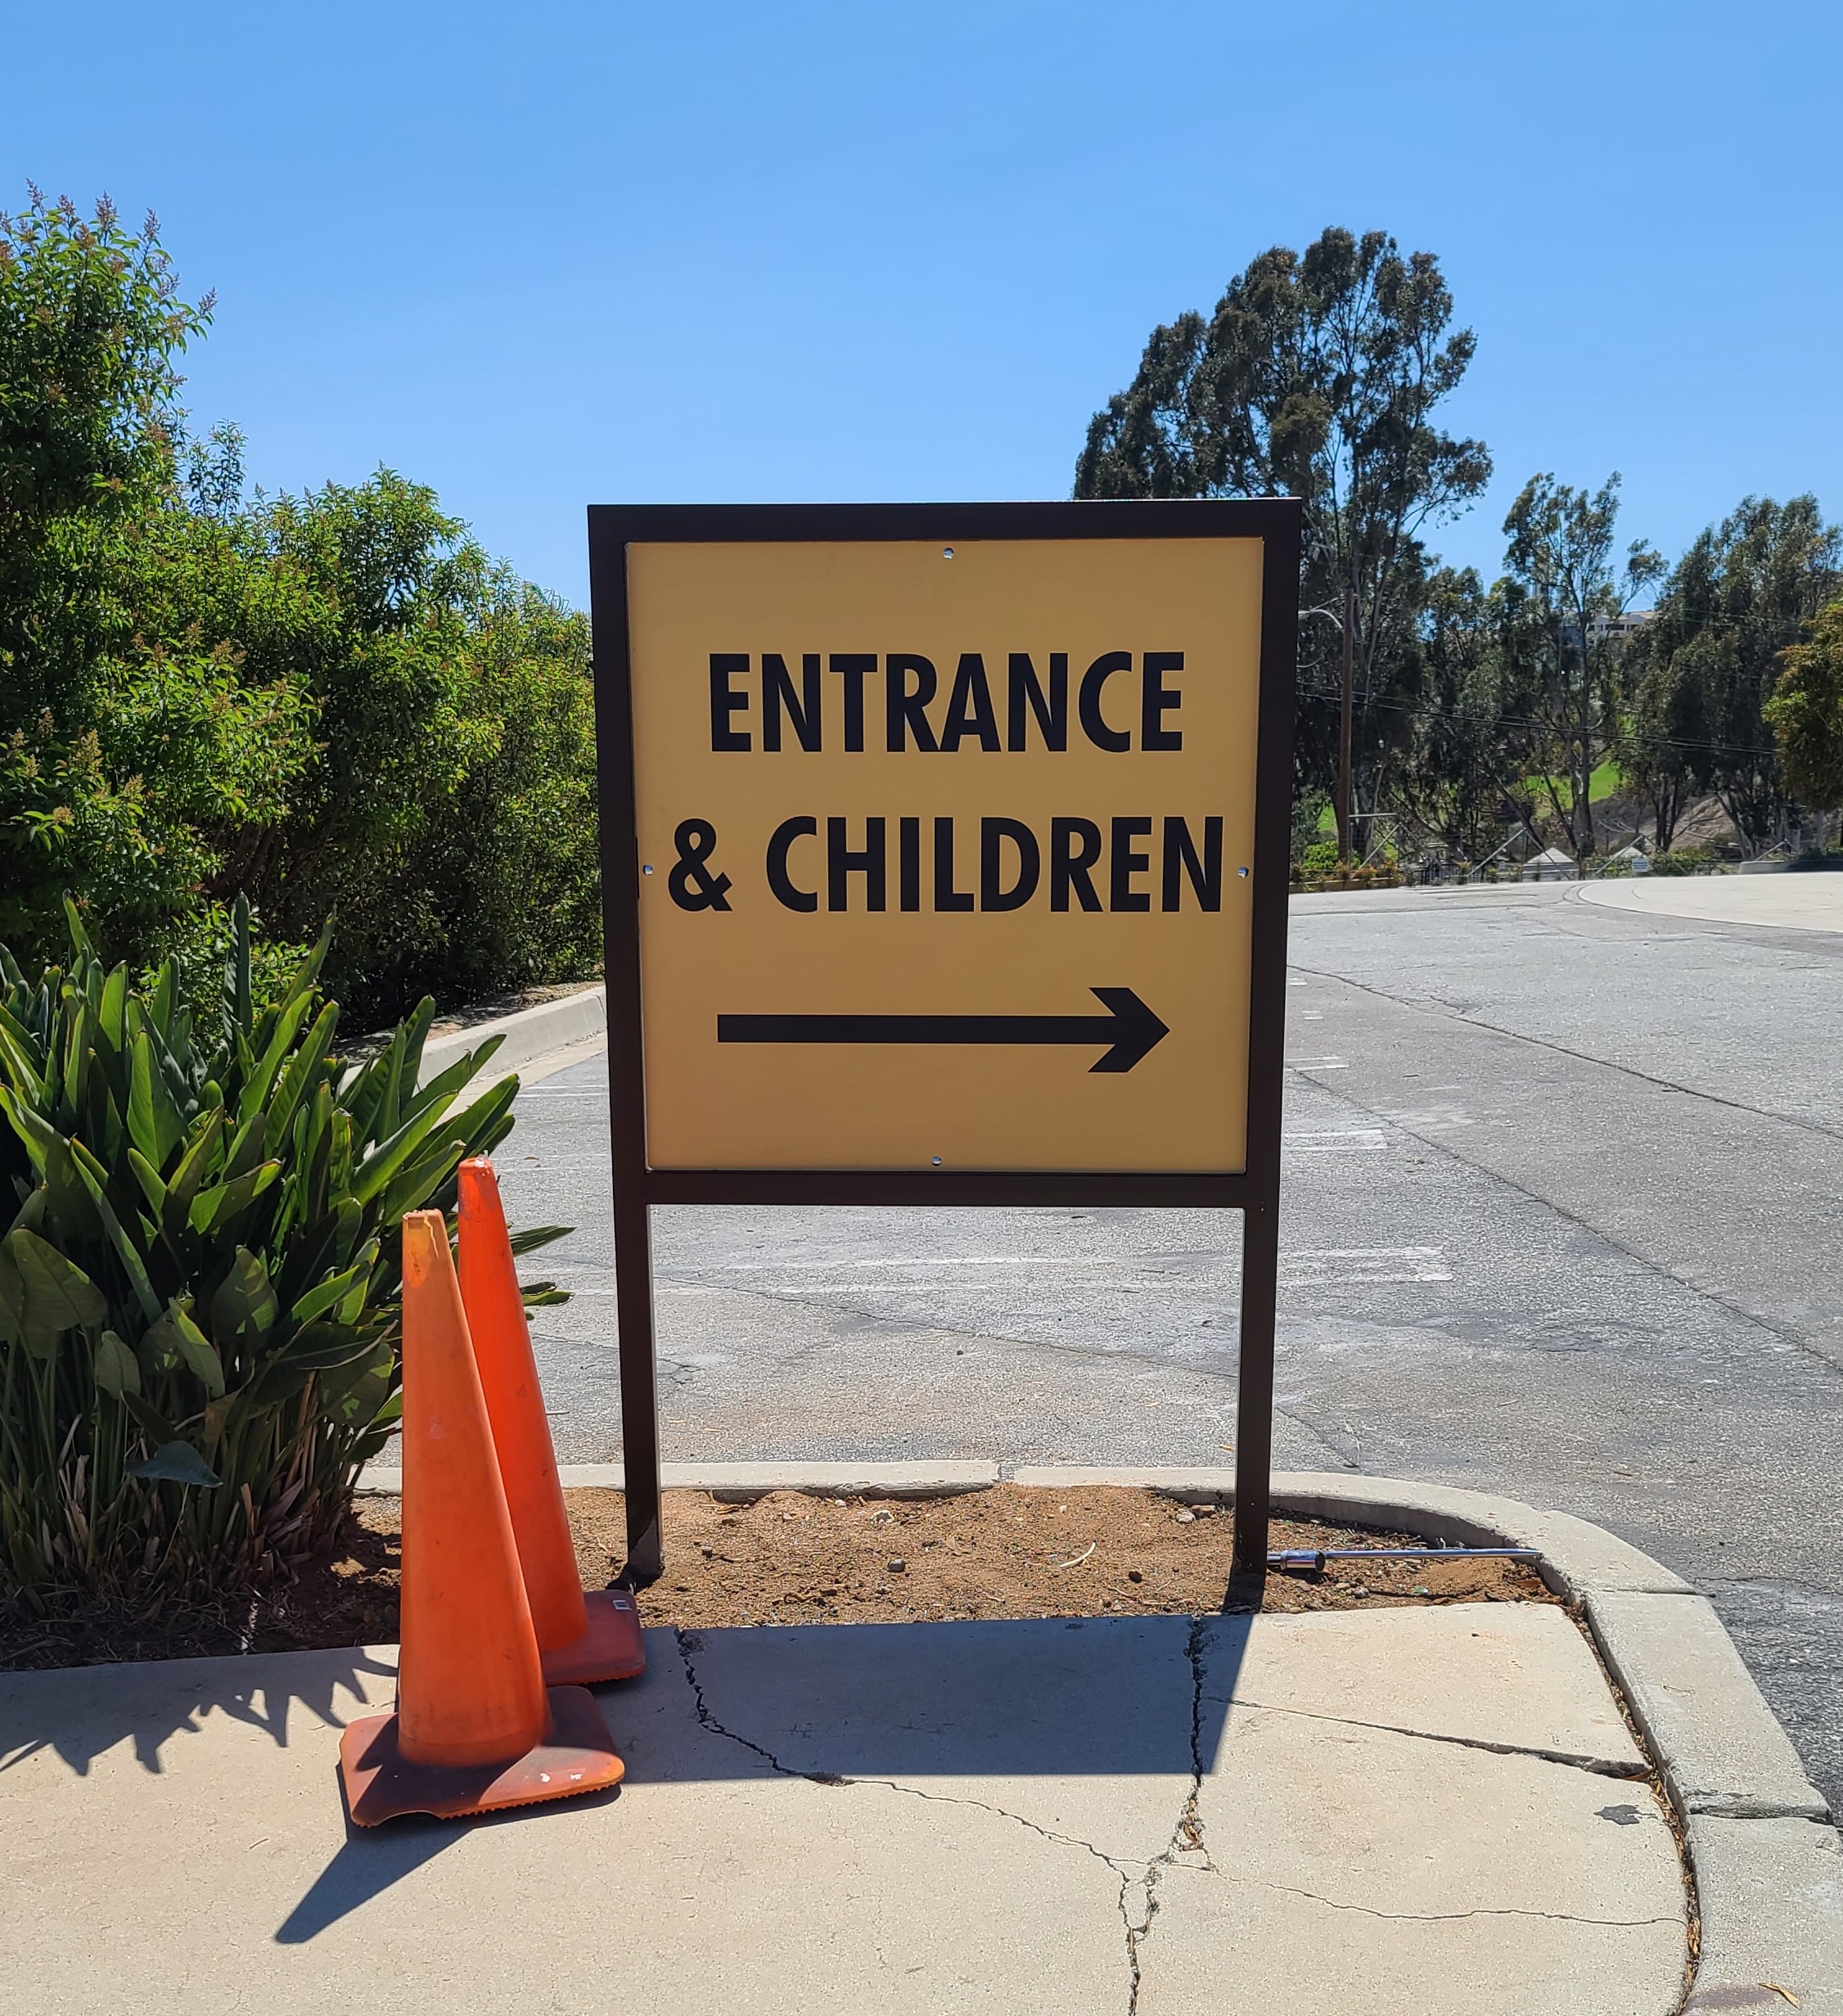 This post and panel directional sign for Malibu Presbyterian Church directs visitors to the entrance area and the church's children section.